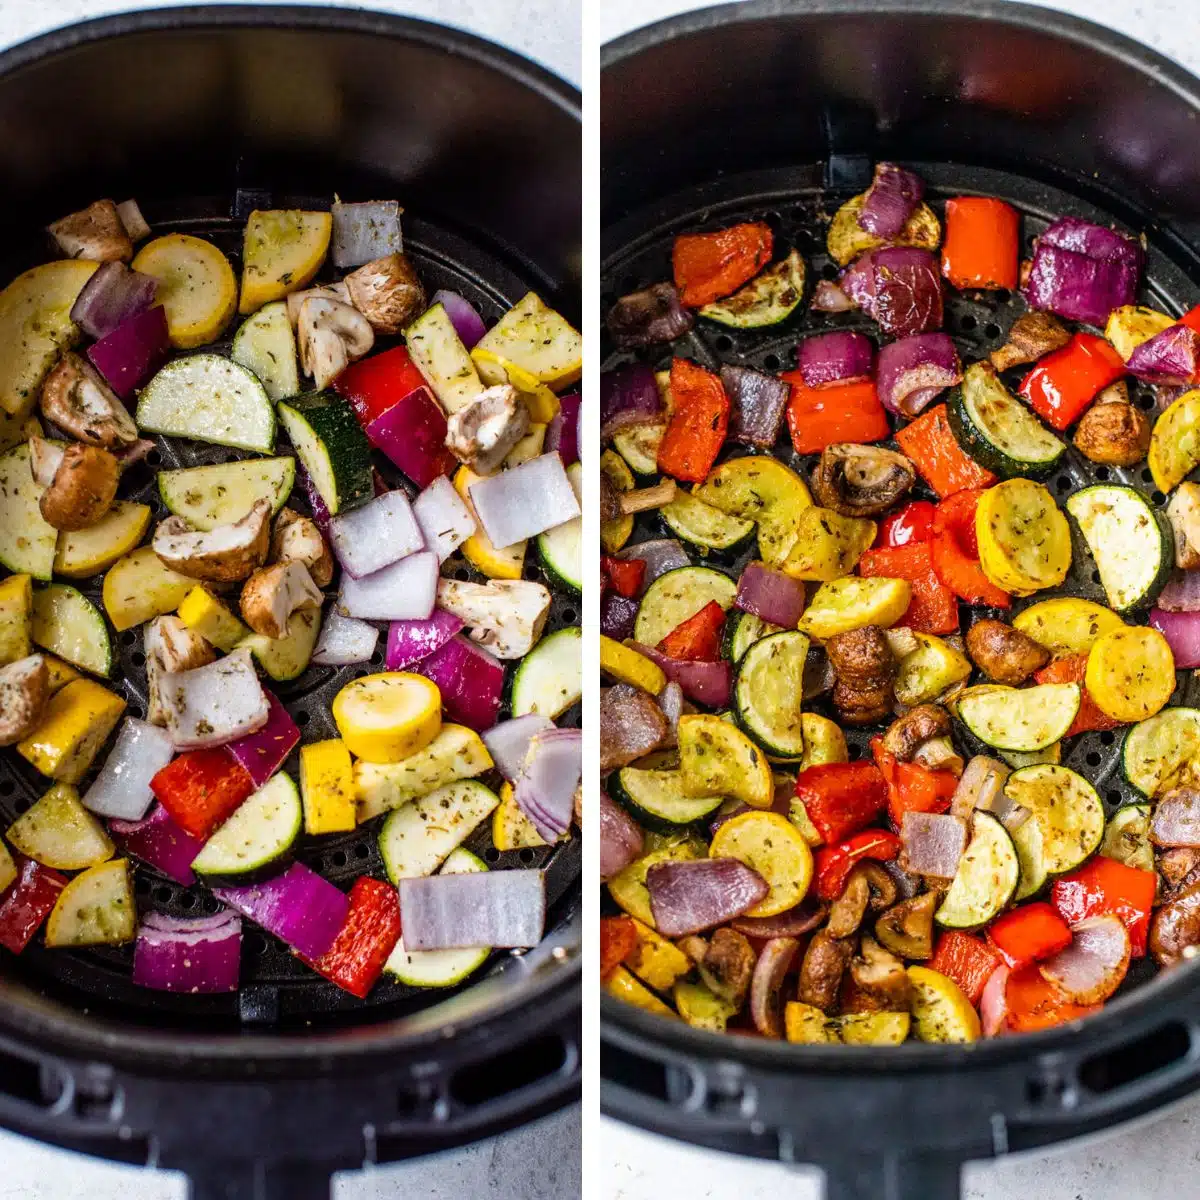 2 images: the left image shows chopped vegetables placed in an air fryer and the right image shows the vegetables roasted in an air fryer